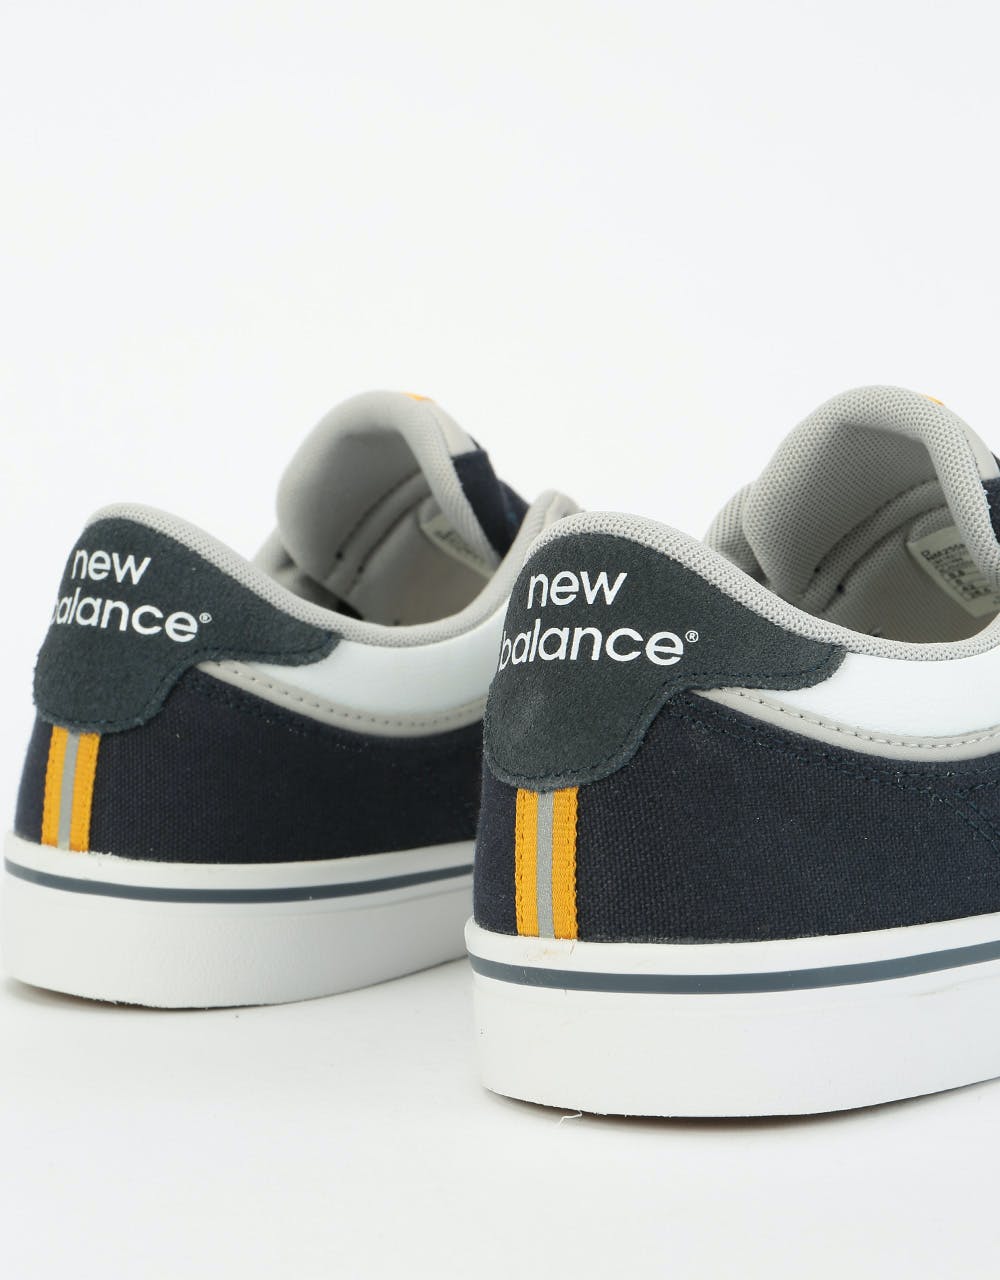 New Balance Numeric 255 Skate Shoes - Navy/Gold